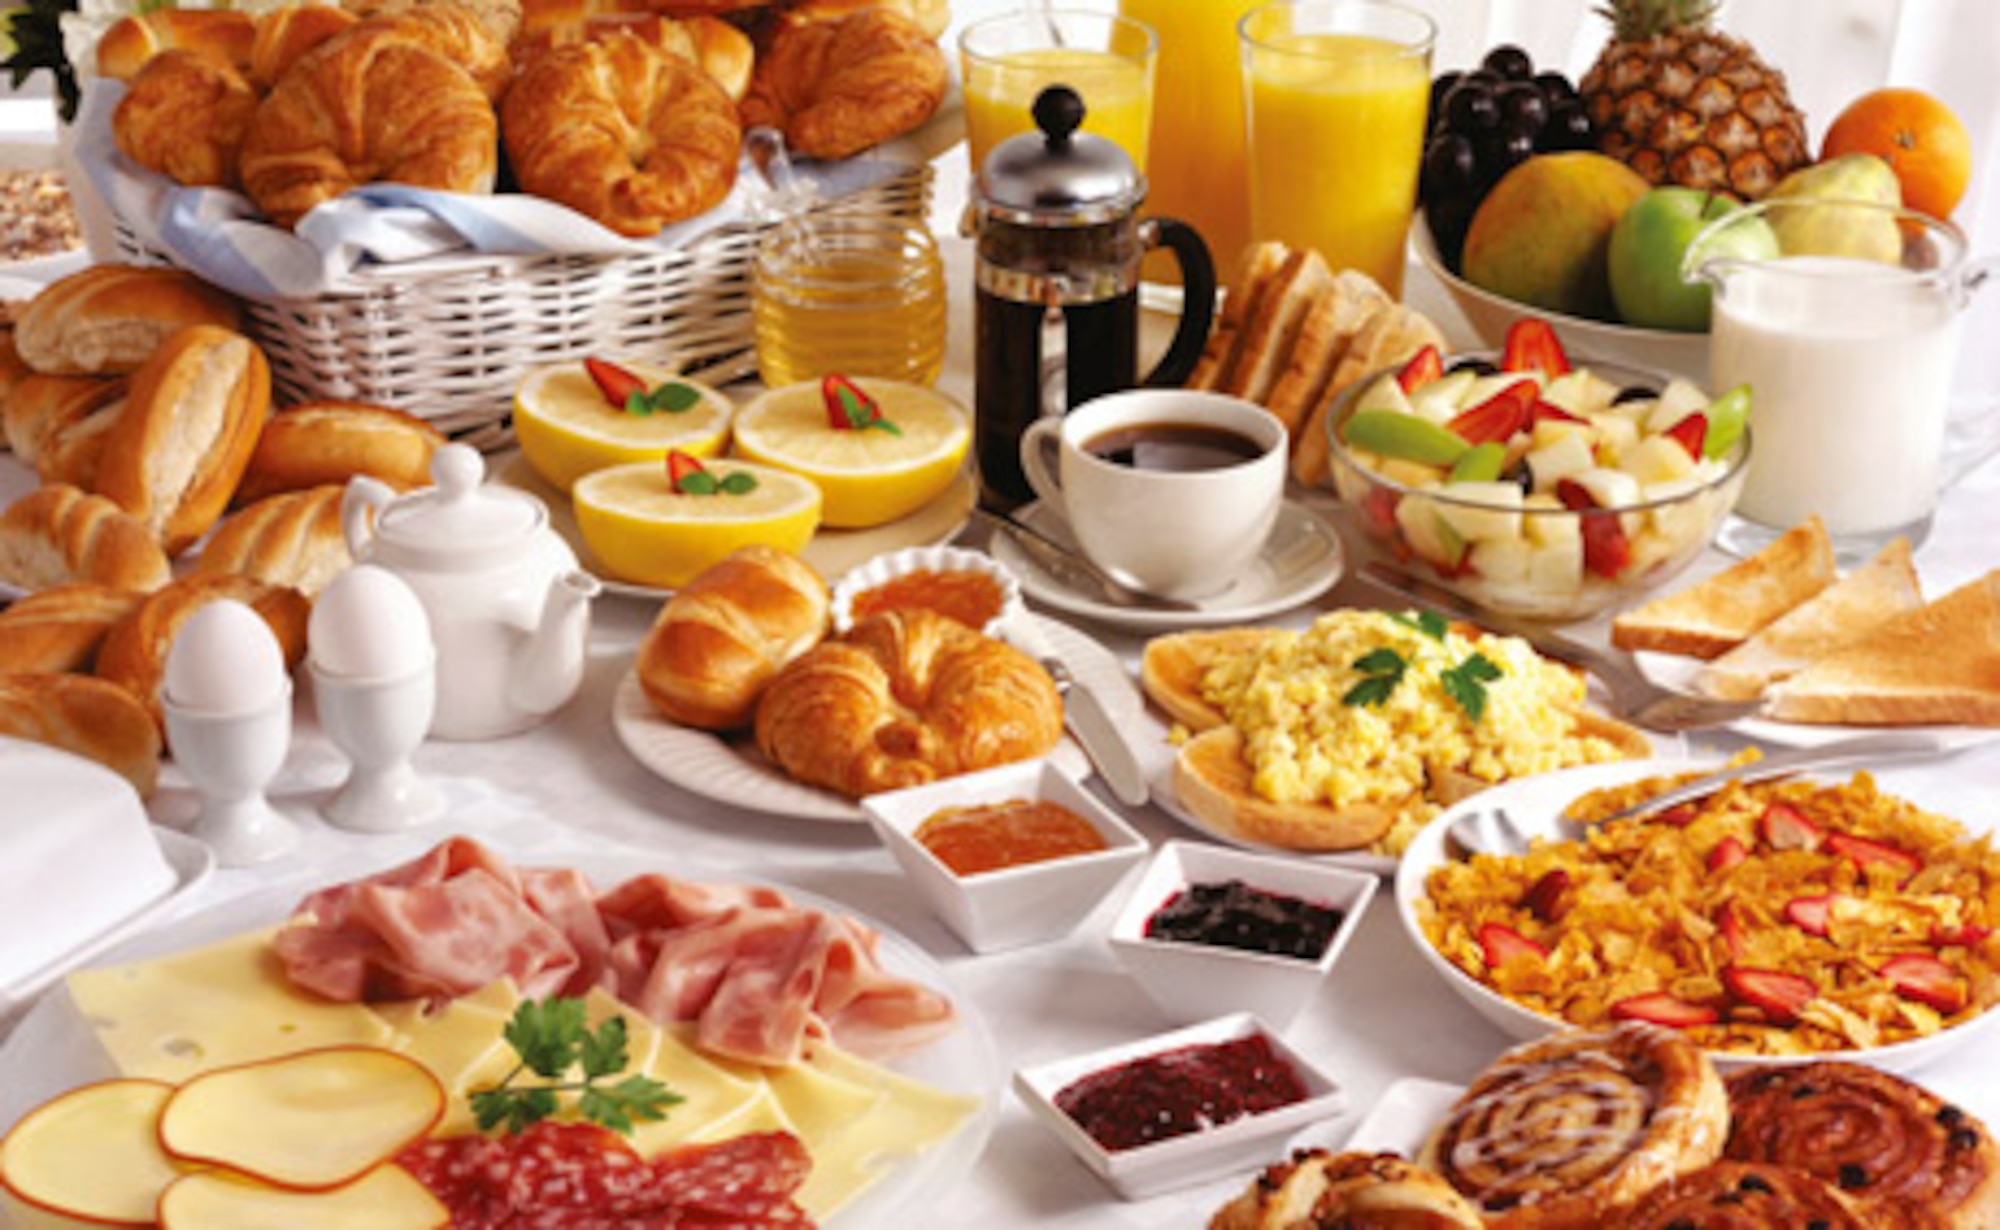 Breakfast is the first opportunity we have to give our body energy to perform our daily physical and mental activities.